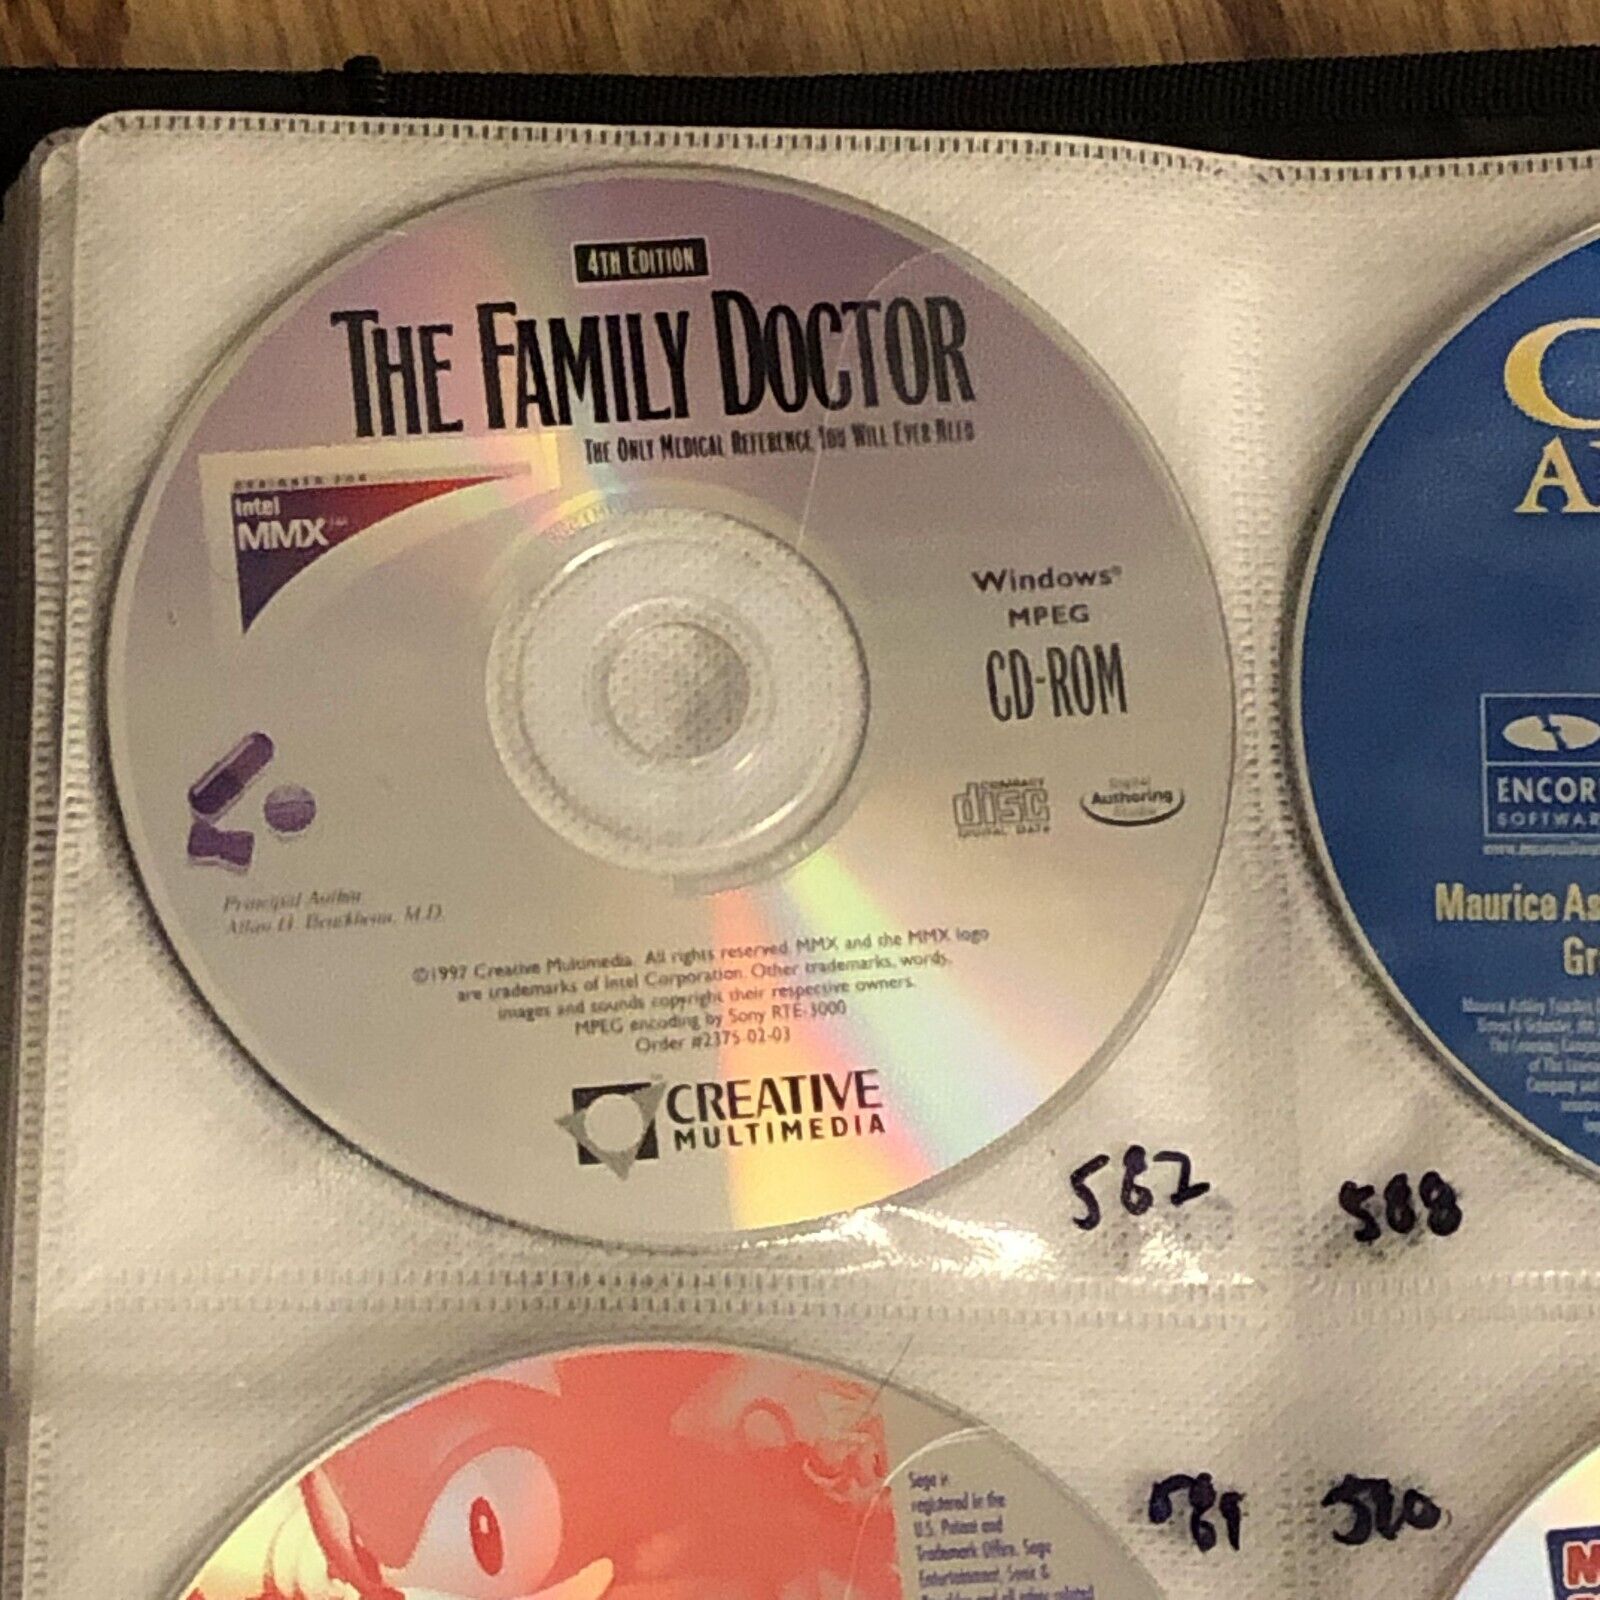 The Family Doctor 4th Edition for Windows 95 (PC) Reference Medical disc only